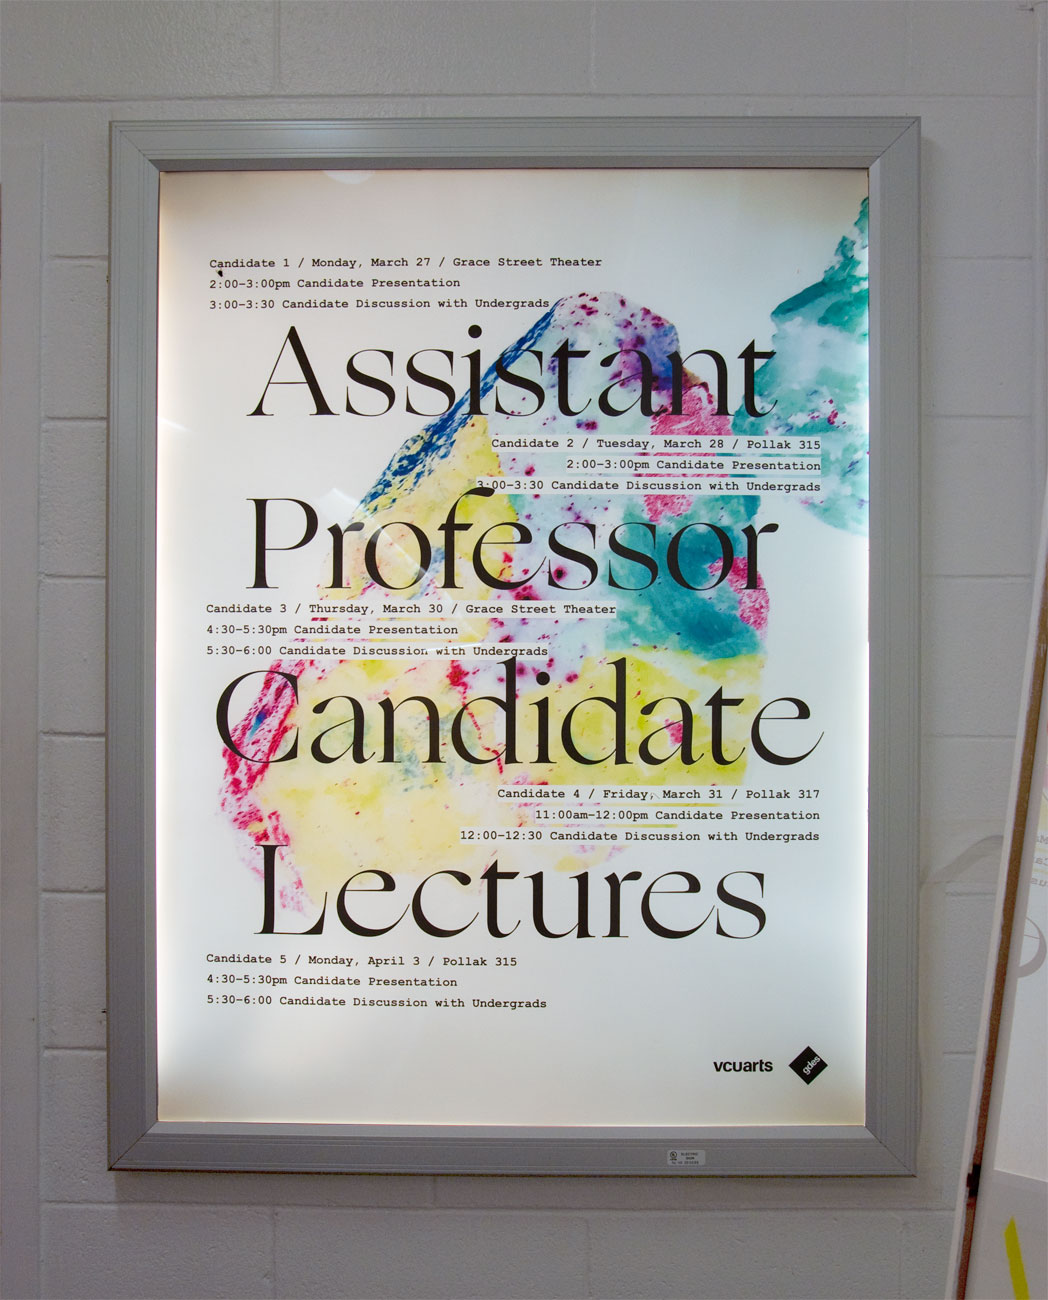 VCU Assistant Professor Candidate lectures poster, designed by Drew Sisk, VCU MFA